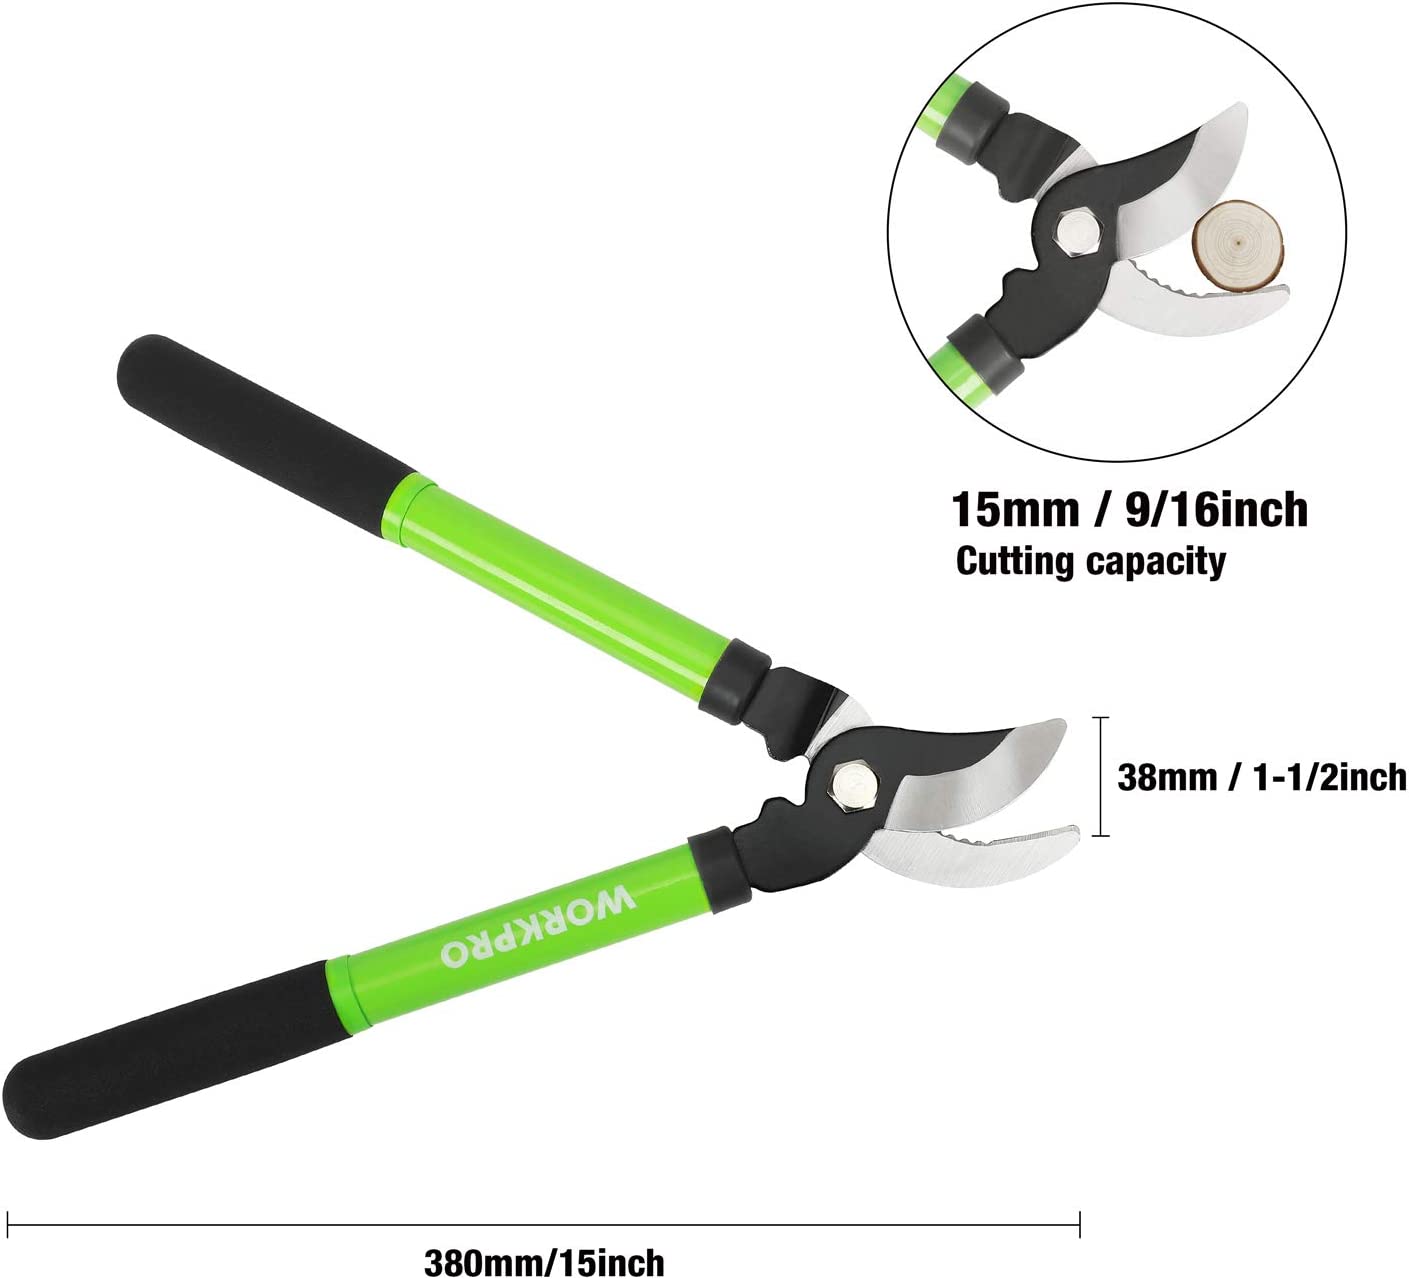 Limb and Branch Pruner Tool Set, Heat-Treated Steel Construction with Non-Stick Teflon-Coated Blades, Comfortable Nylon Grips, On/Off Lock, (2 piece)